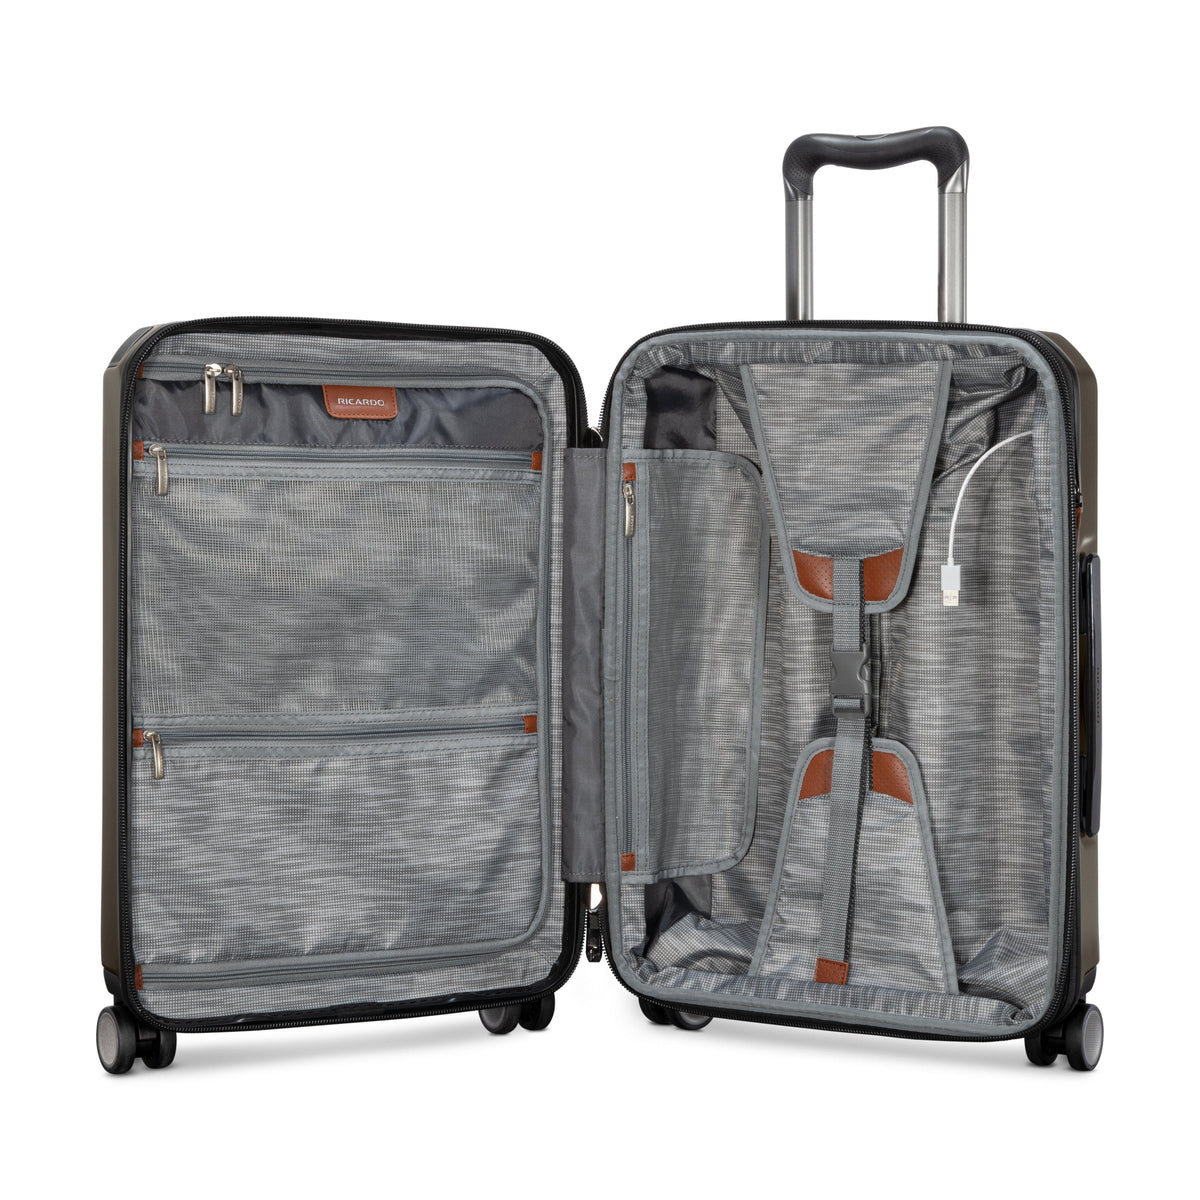 Montecito 2.0 Hardside 2-Piece Set (21" Carry-On, 29" Large Checked)